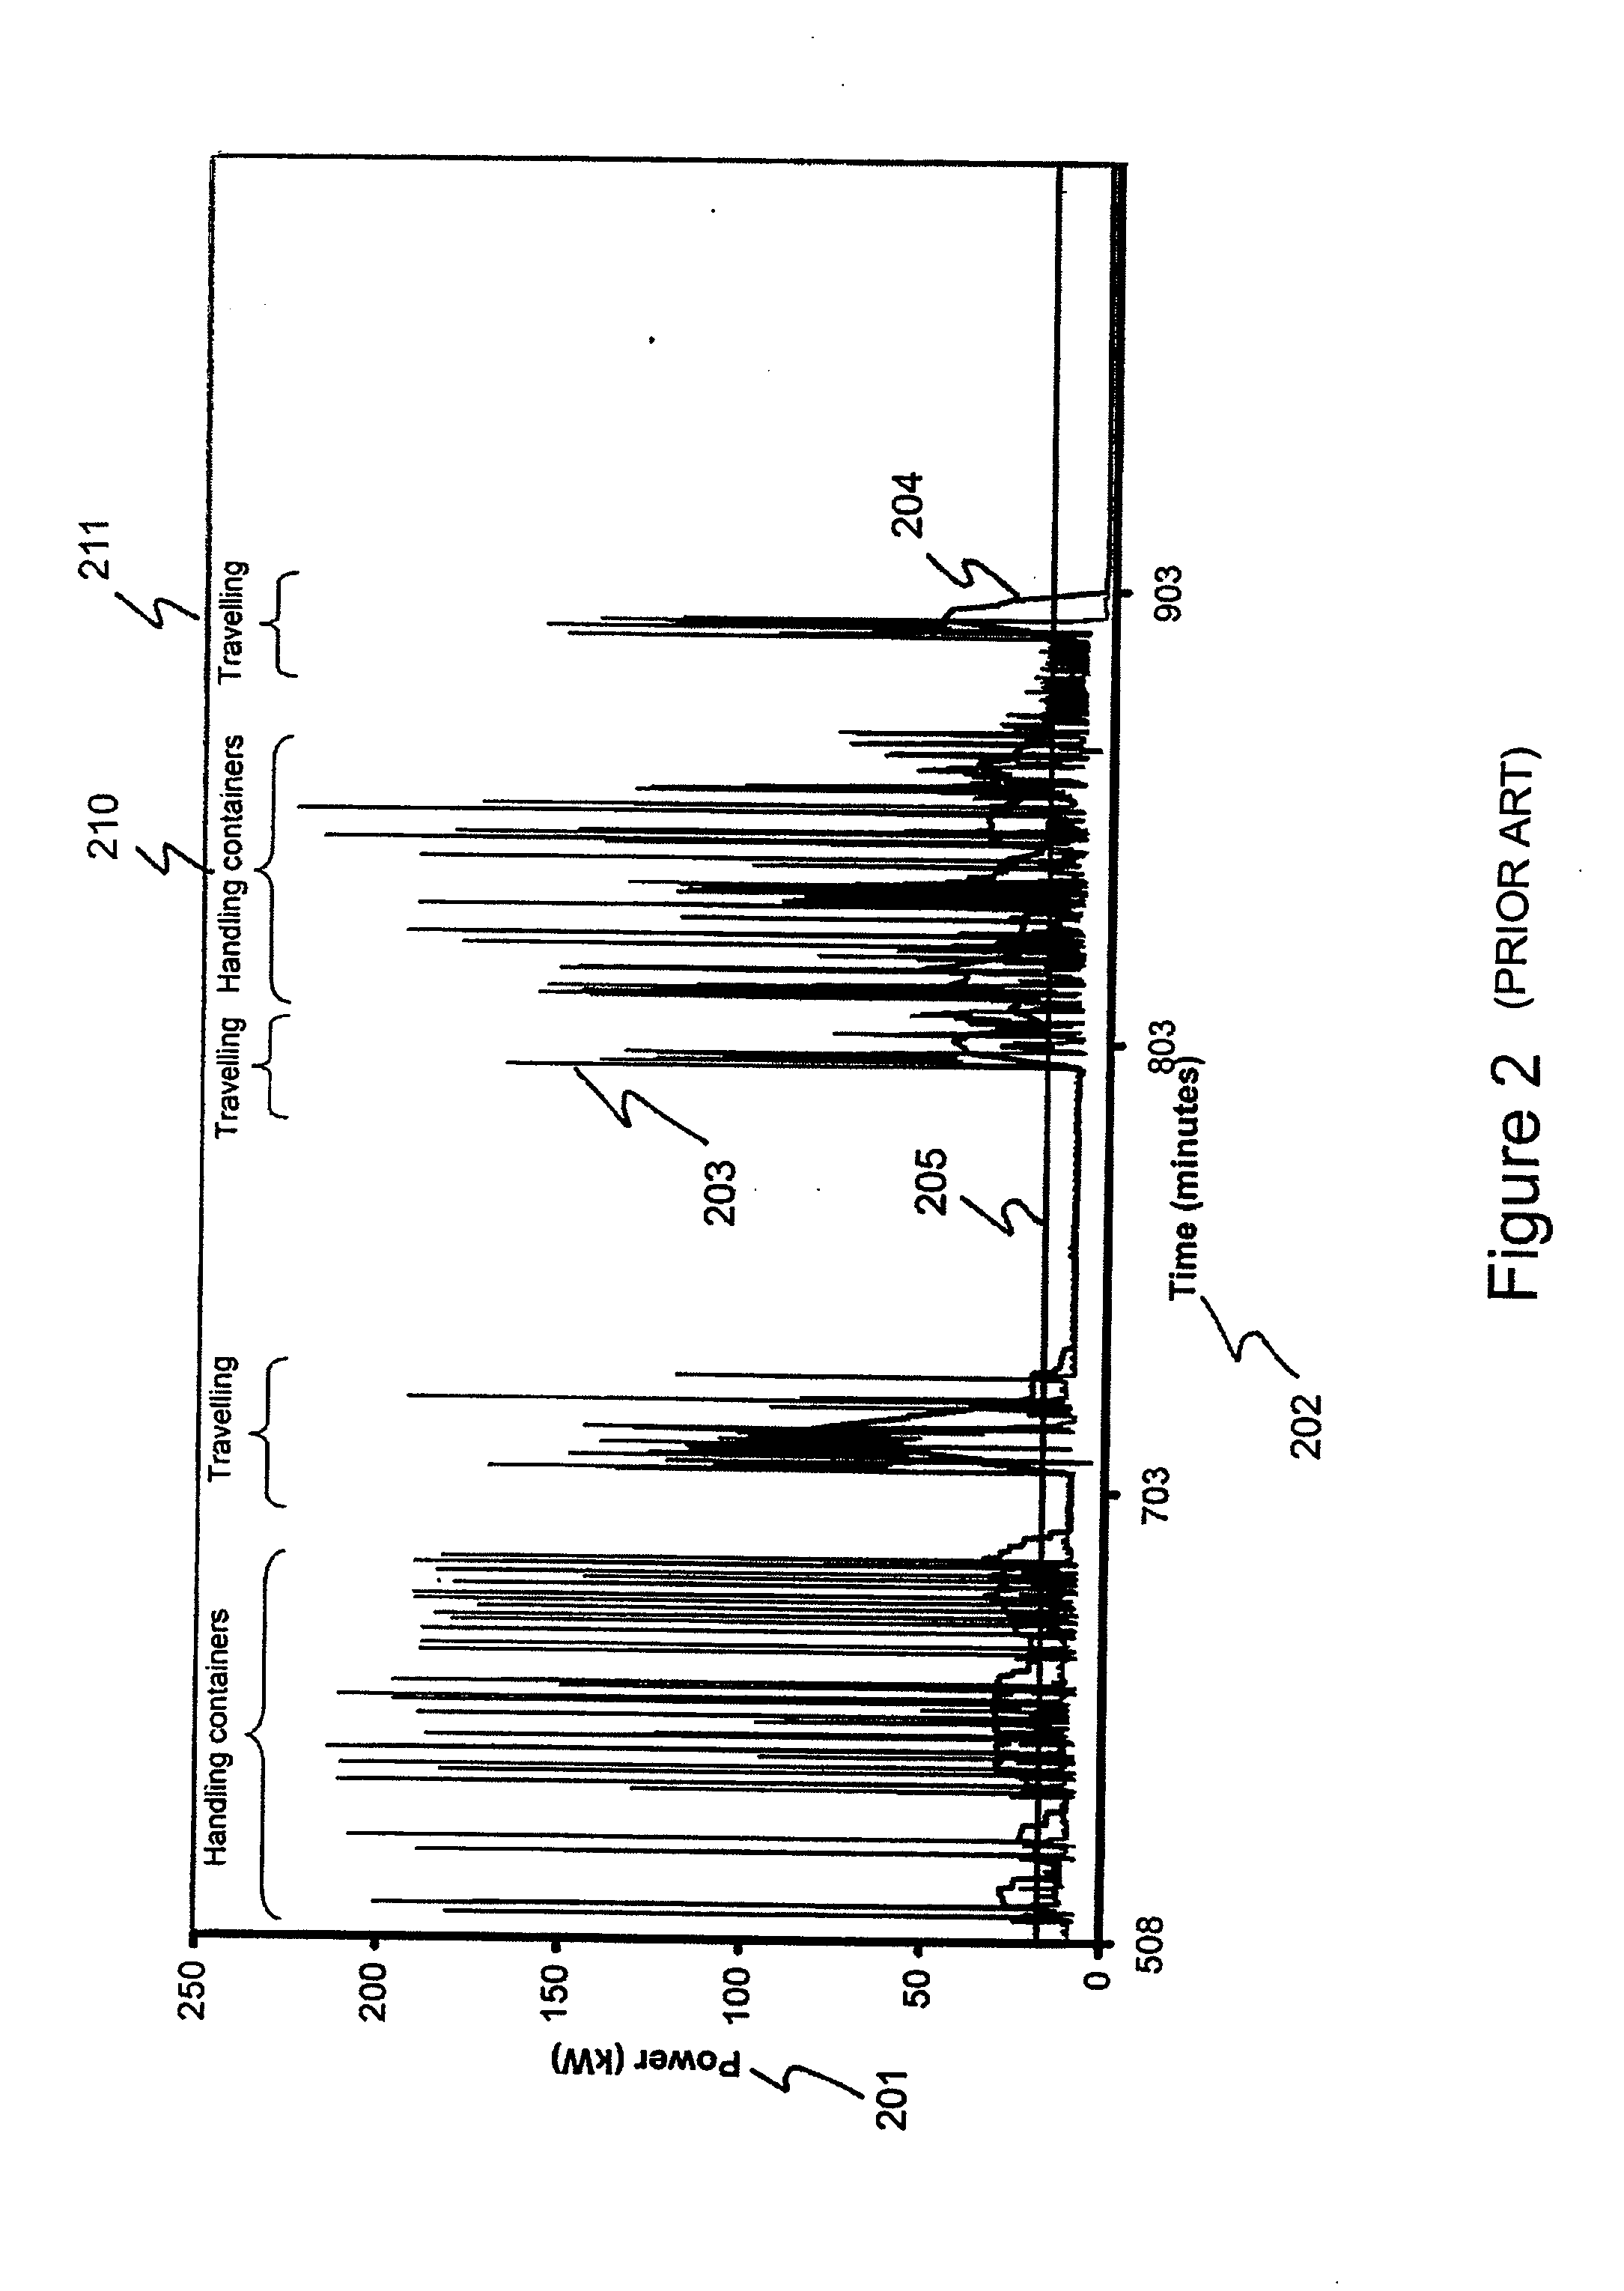 Load-lifting apparatus and method of storing energy for the same